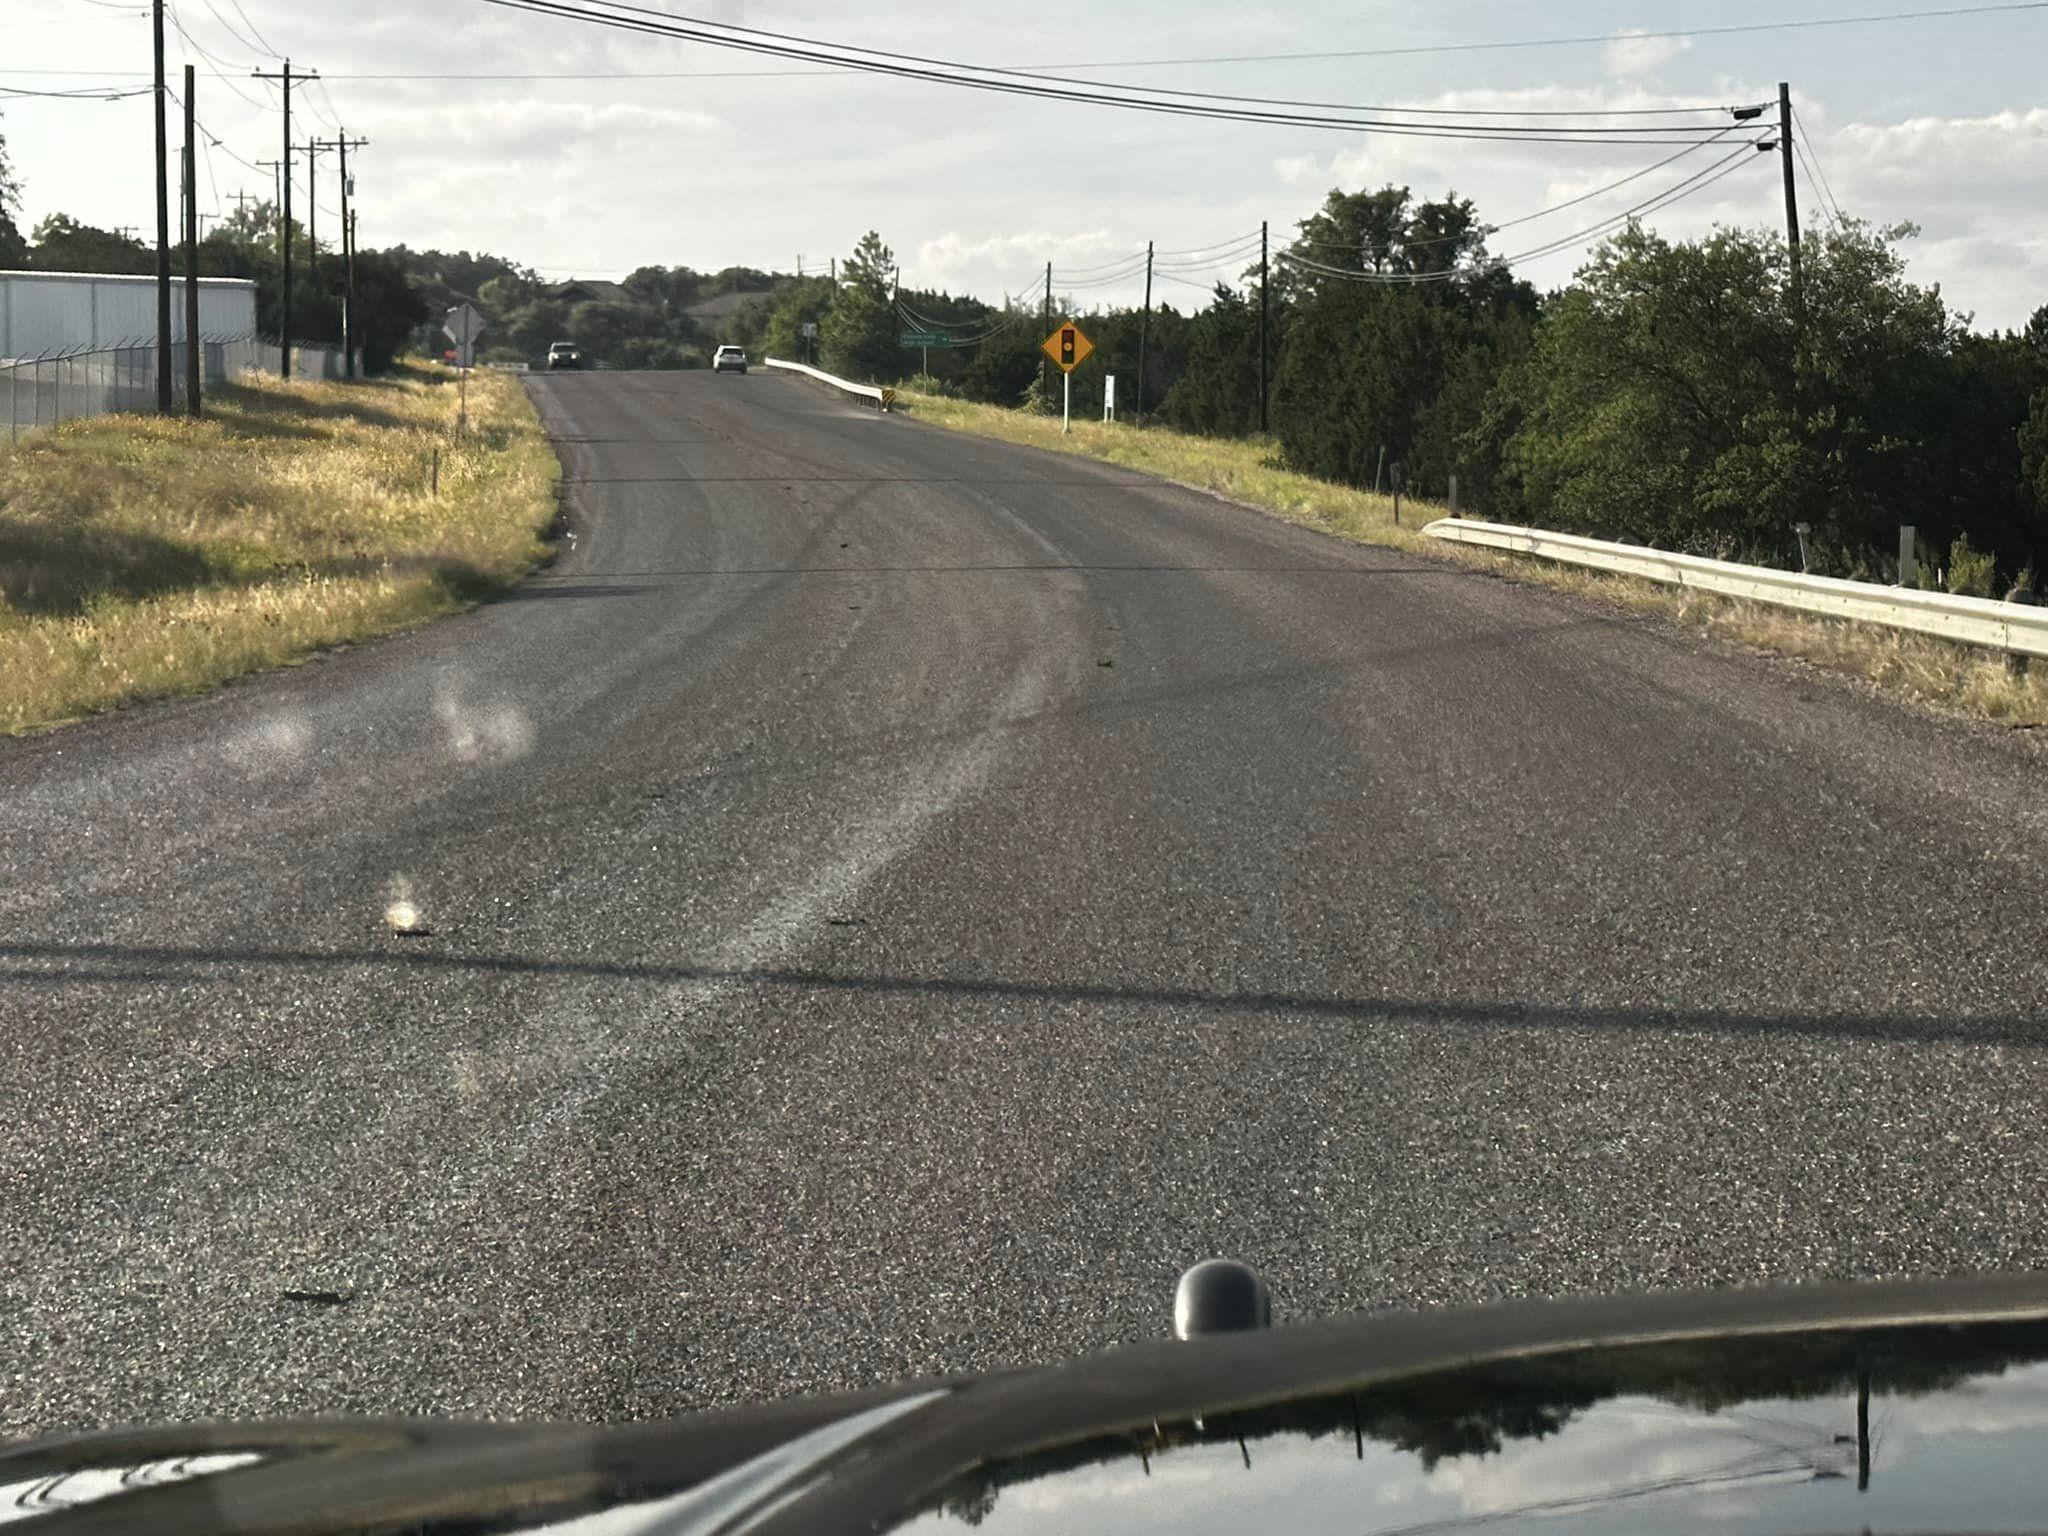 Constable Urges Caution on FM 306, Lane Markers Covered in Oil My